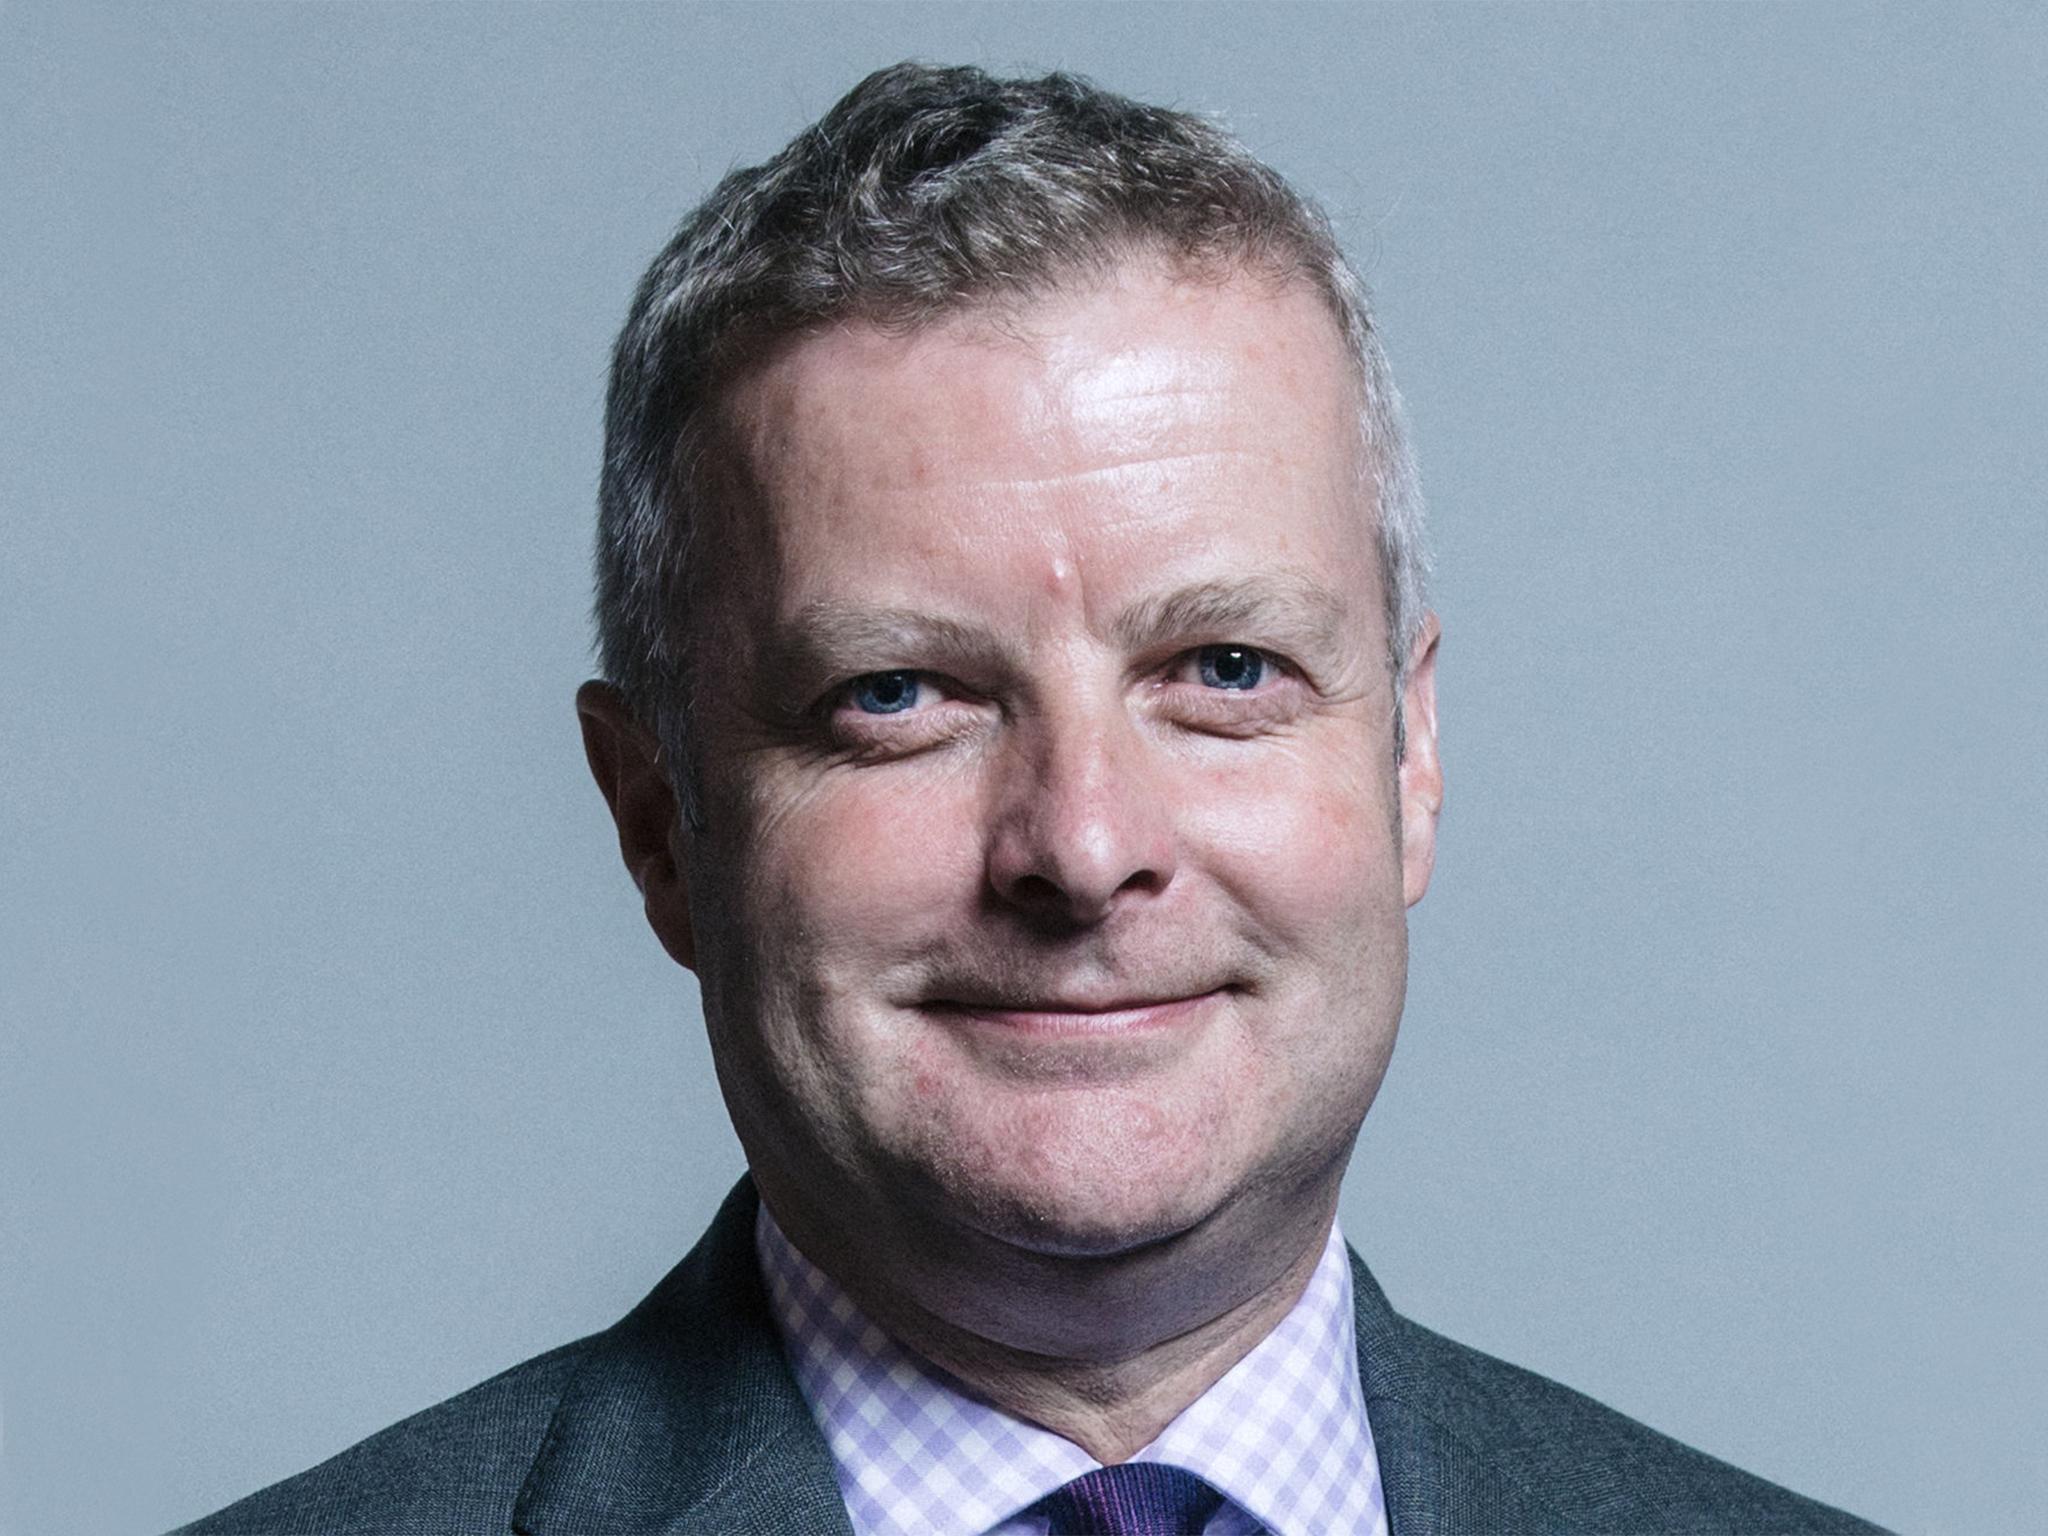 Conservative MP Chris Davies interviewed by police over expense fraud claims